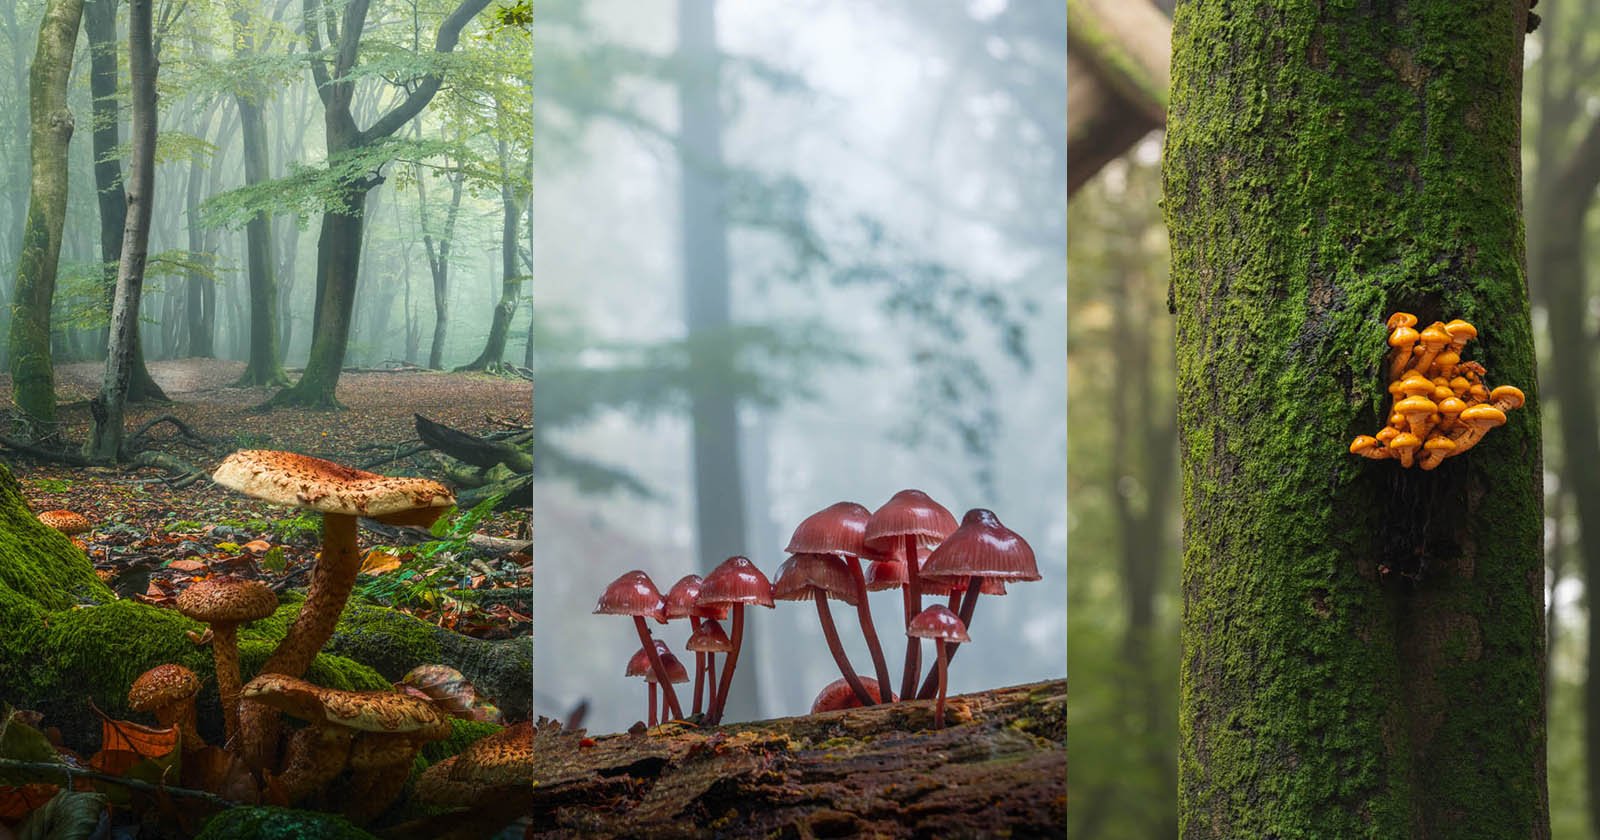  photographing mushrooms their natural world 